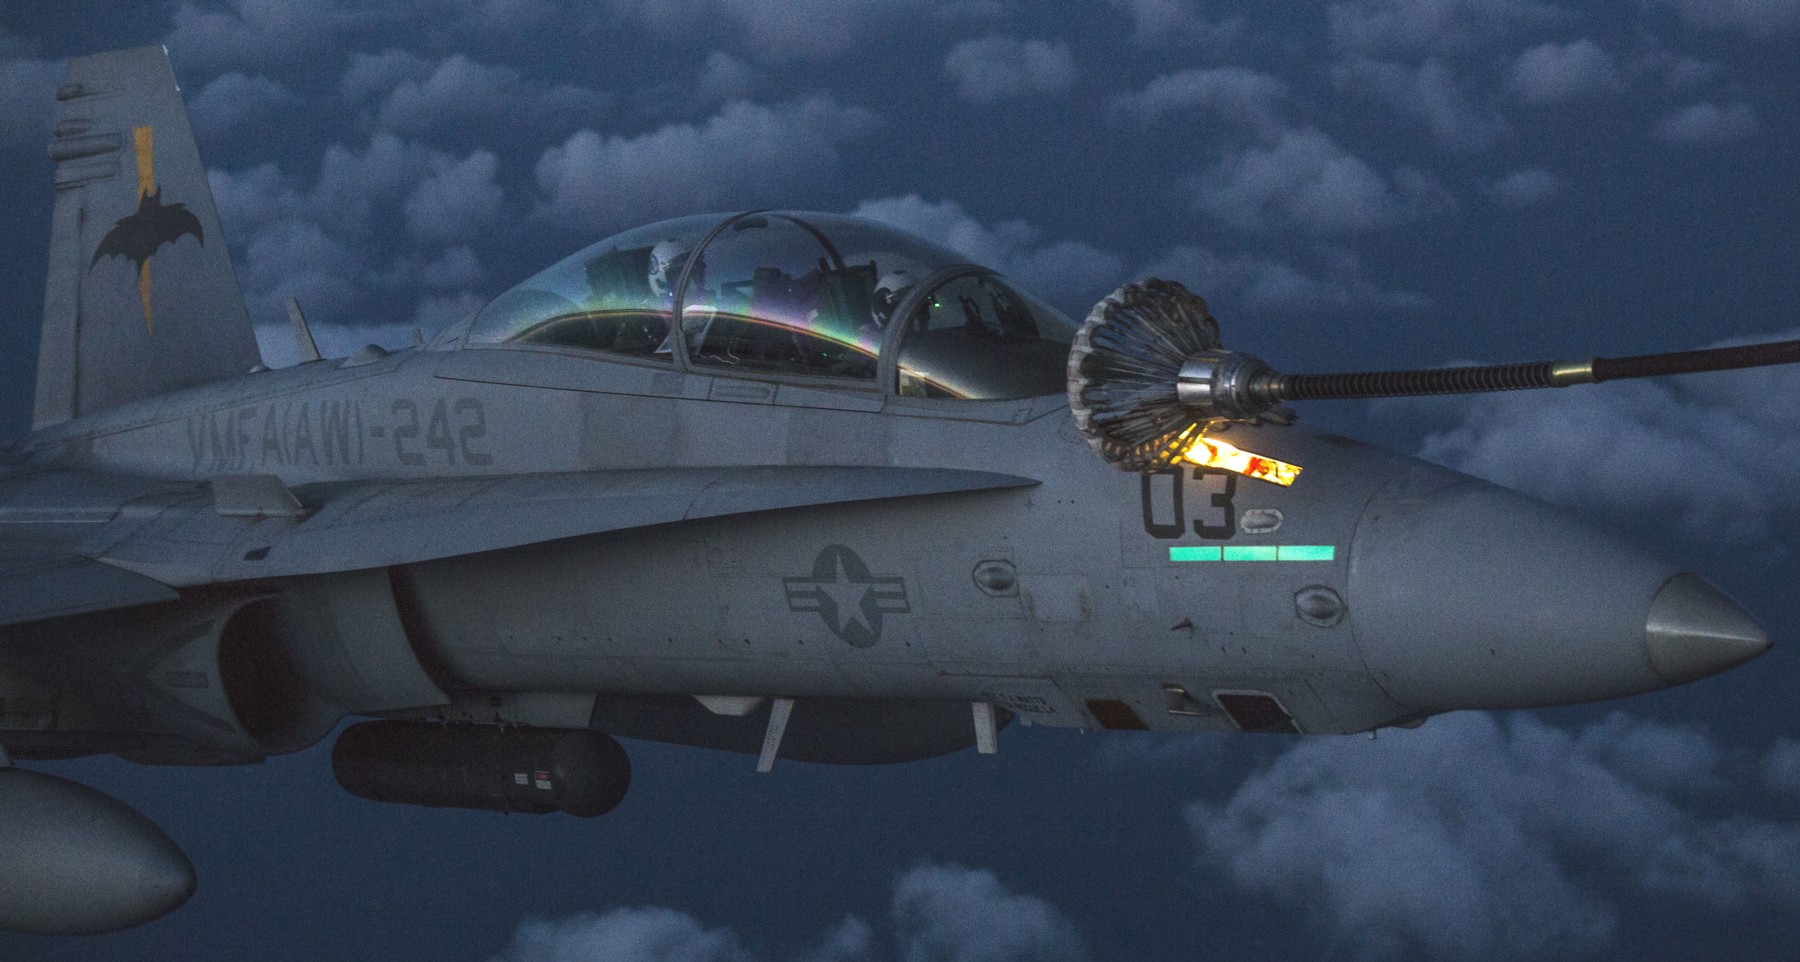 vmfa(aw)-242 bats marine all-weather fighter attack squadron usmc f/a-18d hornet 50 aerial refueling